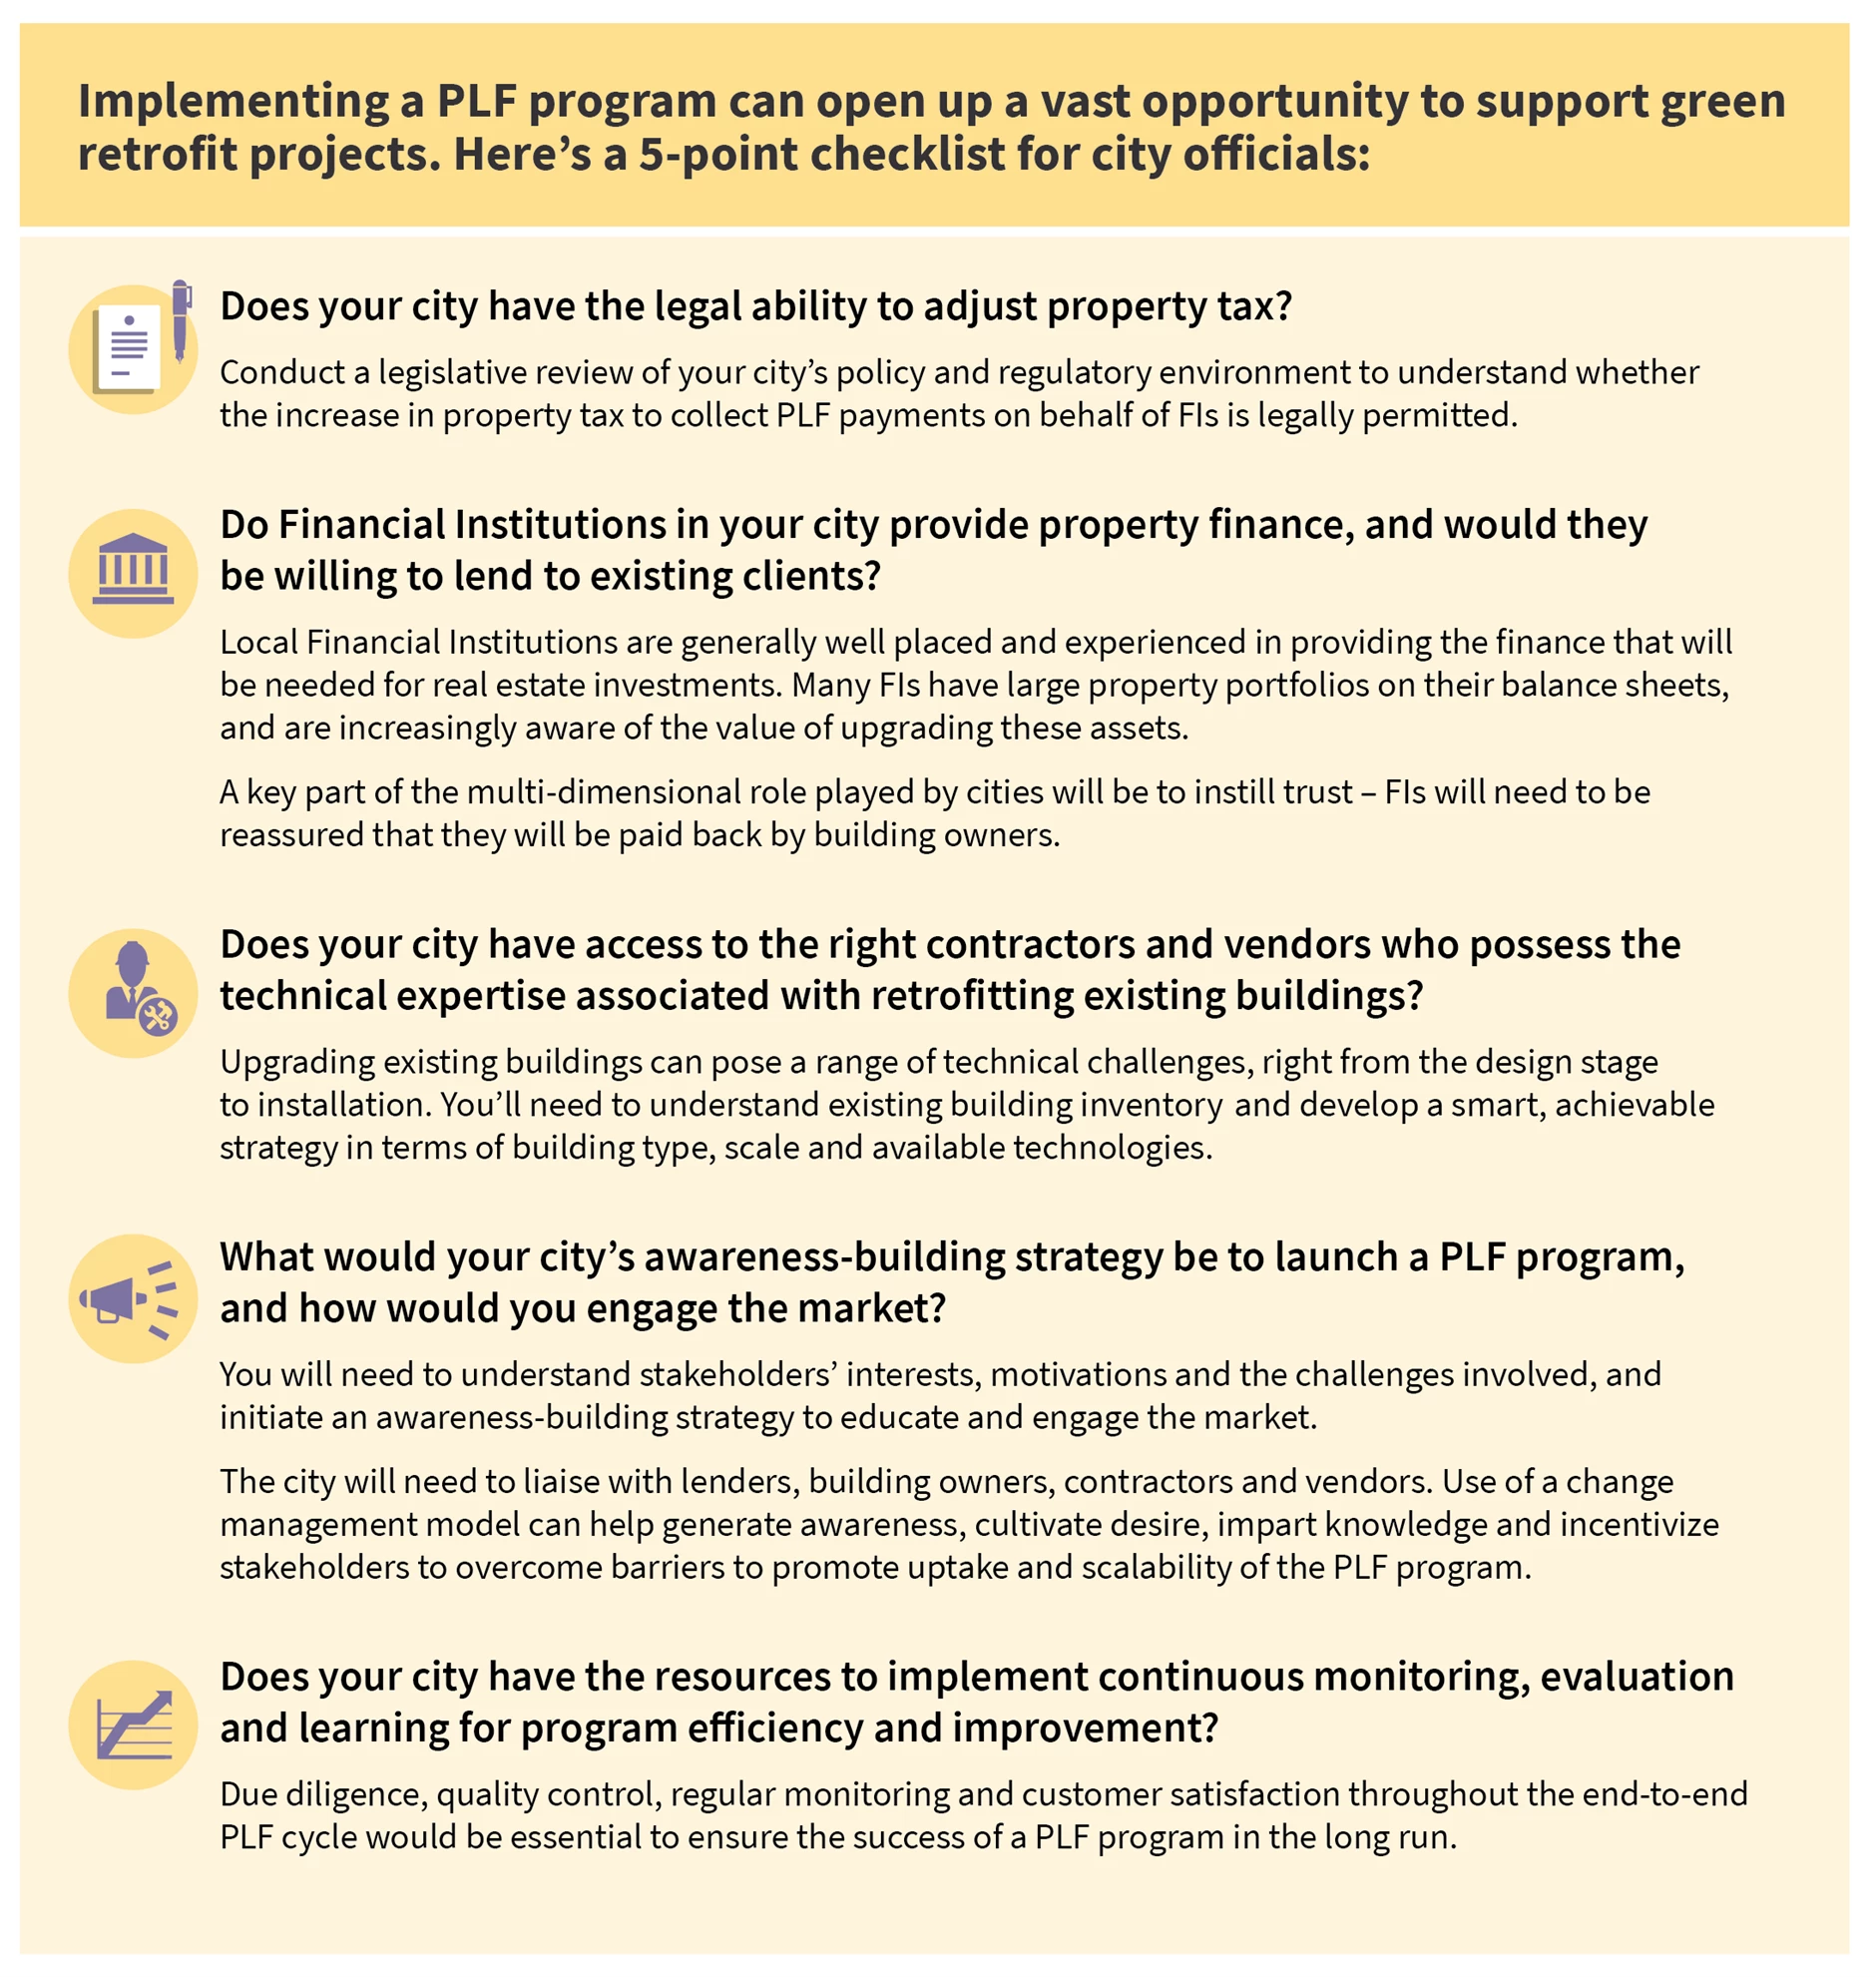 A checklist for city officials implementing a PLF program, which can open an opportunity to support green retrofit projects.